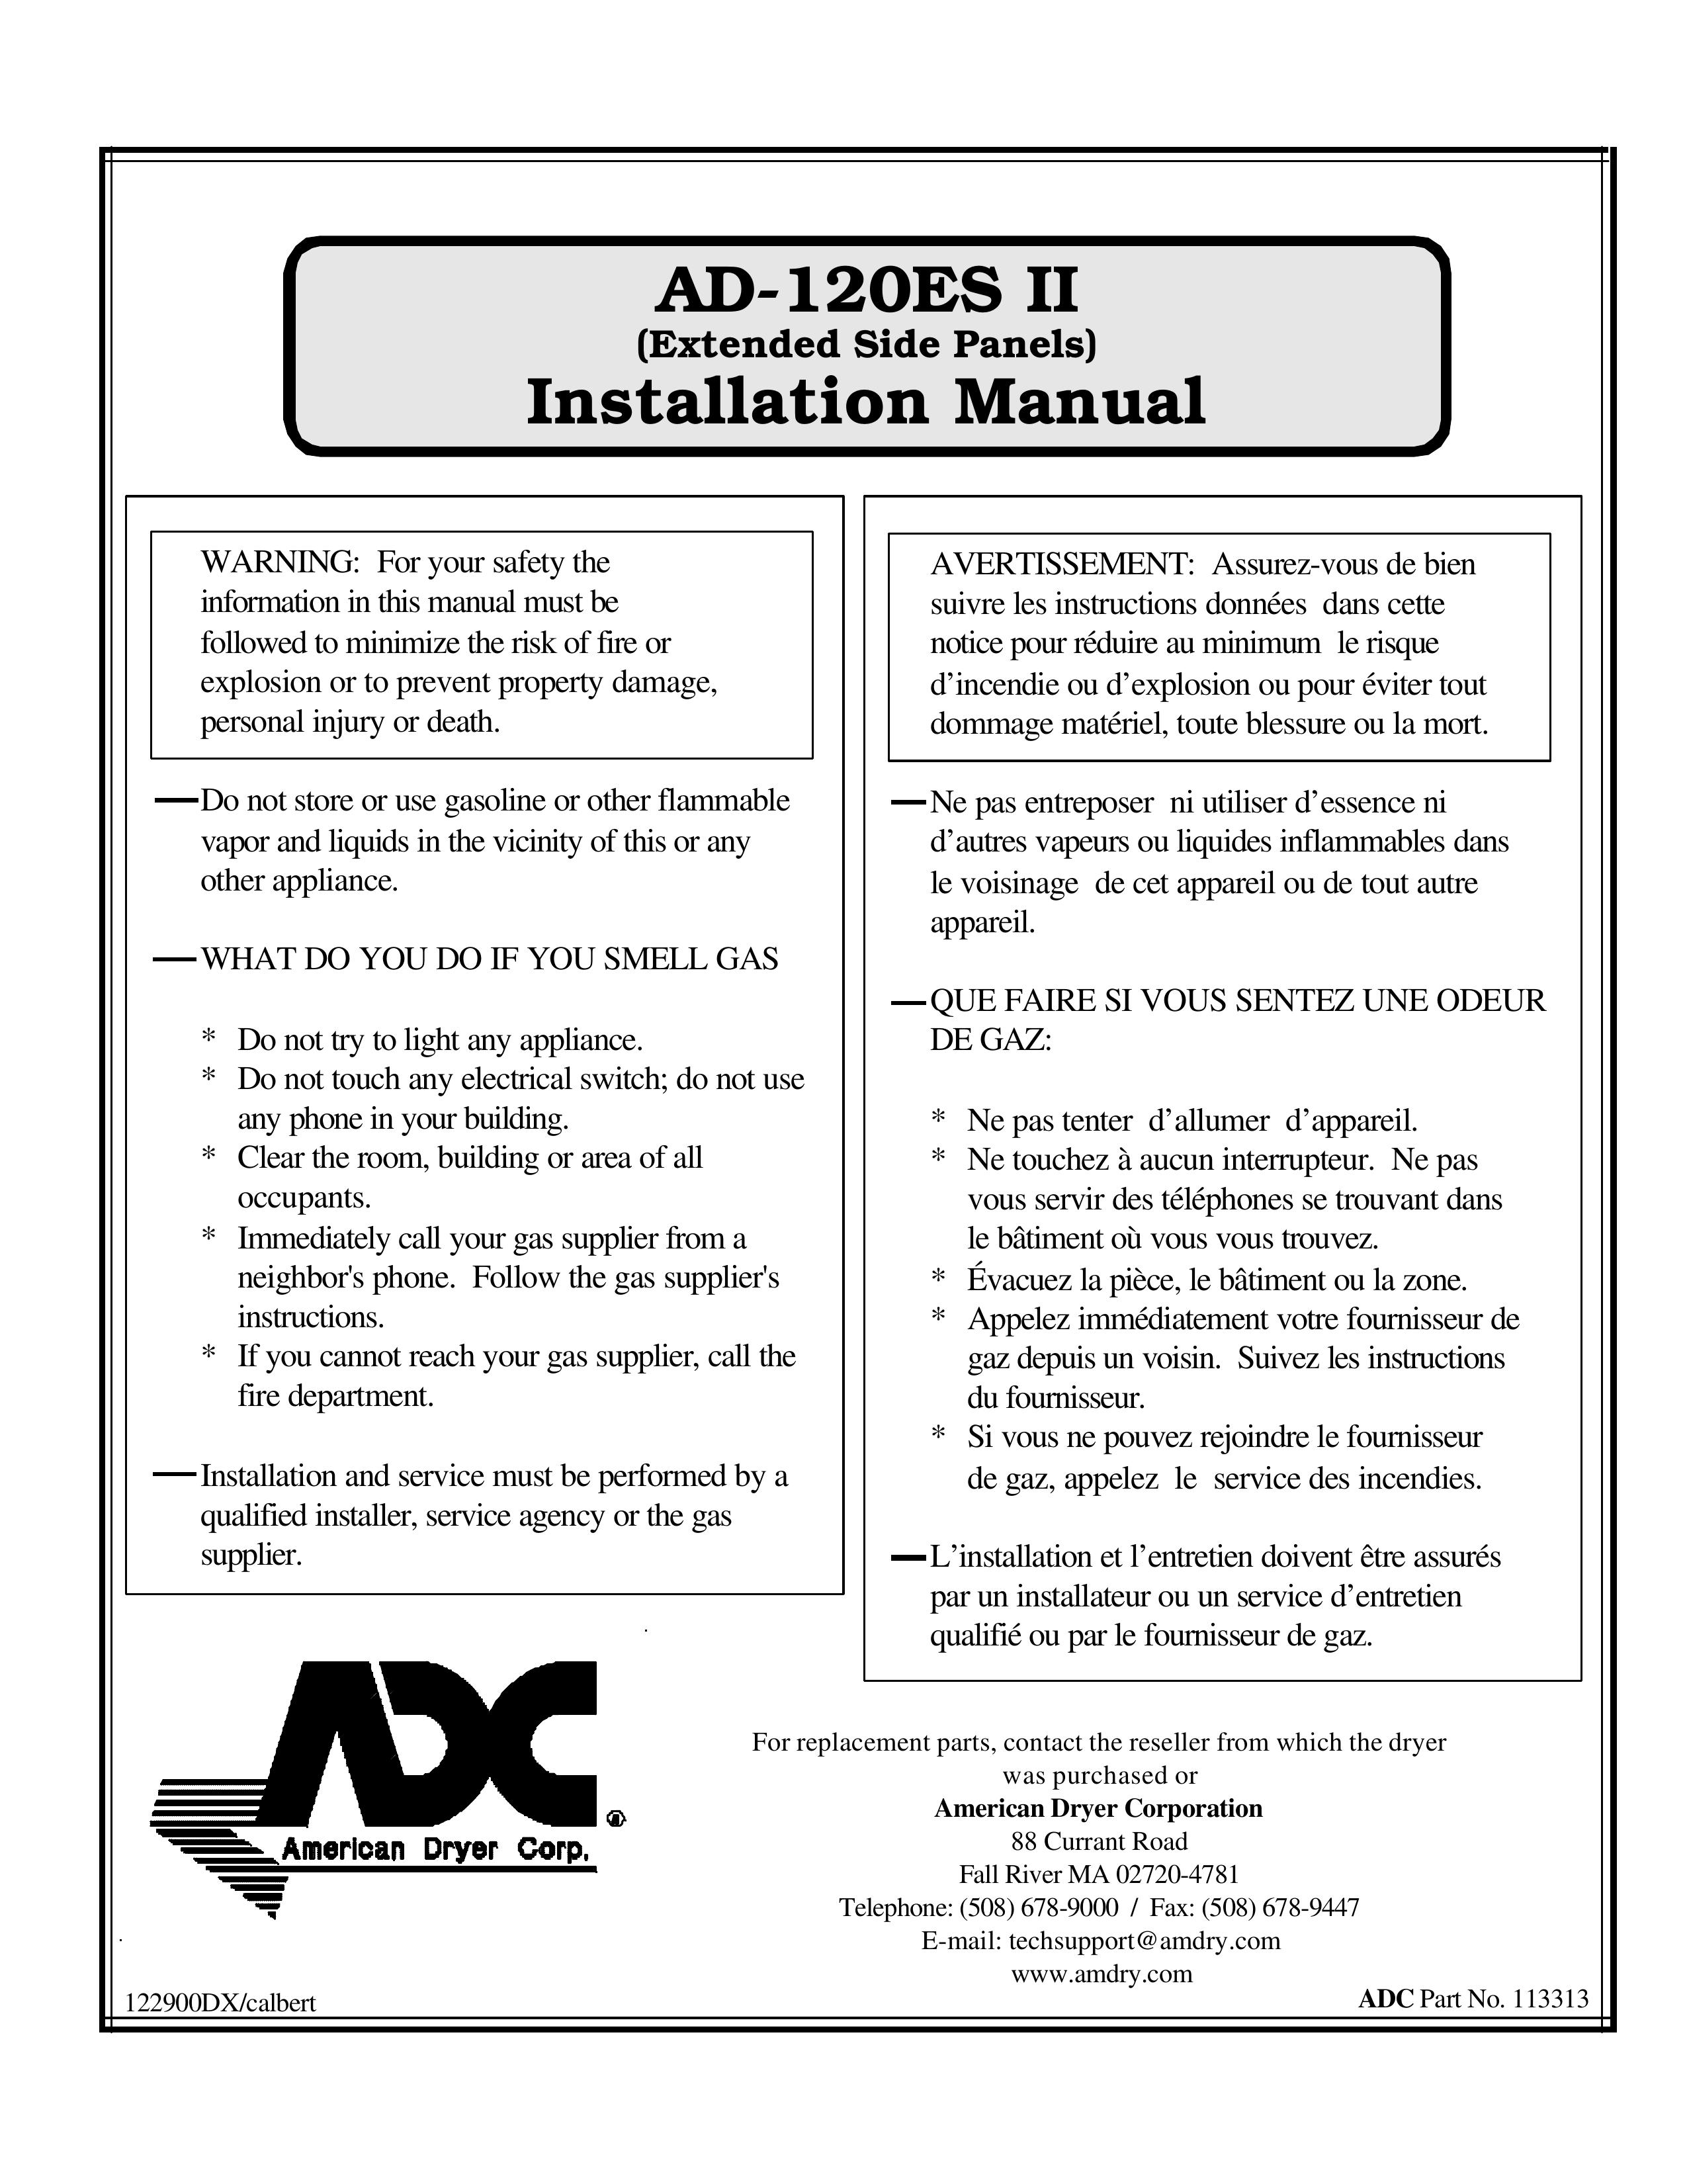 American Dryer Corp. AD-120ES II Clothes Dryer User Manual